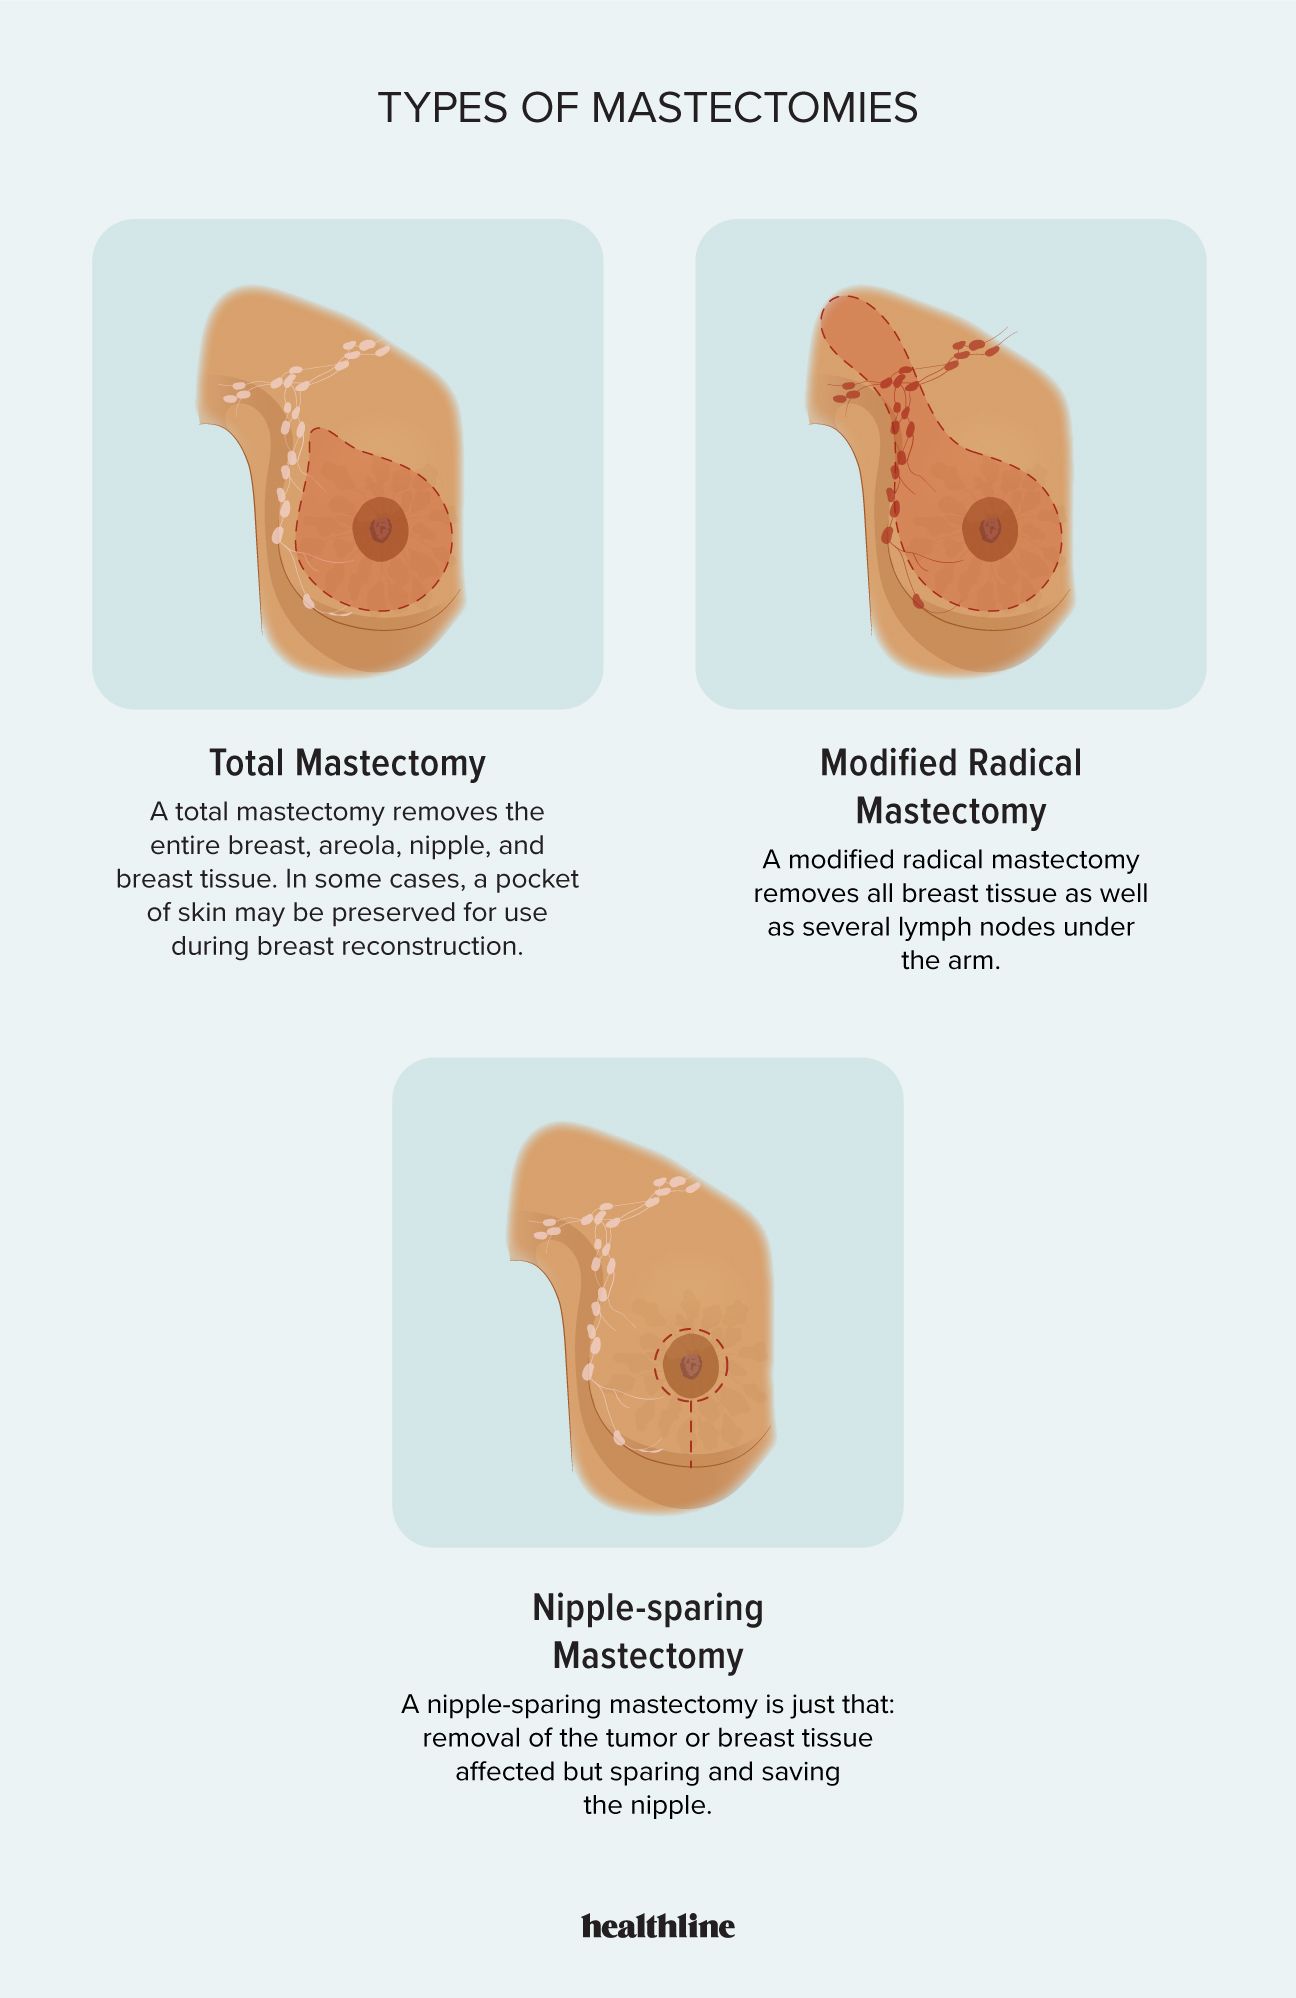 illustrated infographic depicting different types of mastectomy, including total mastectomy, modified radical mastectomy, and nipple-sparing mastectomy